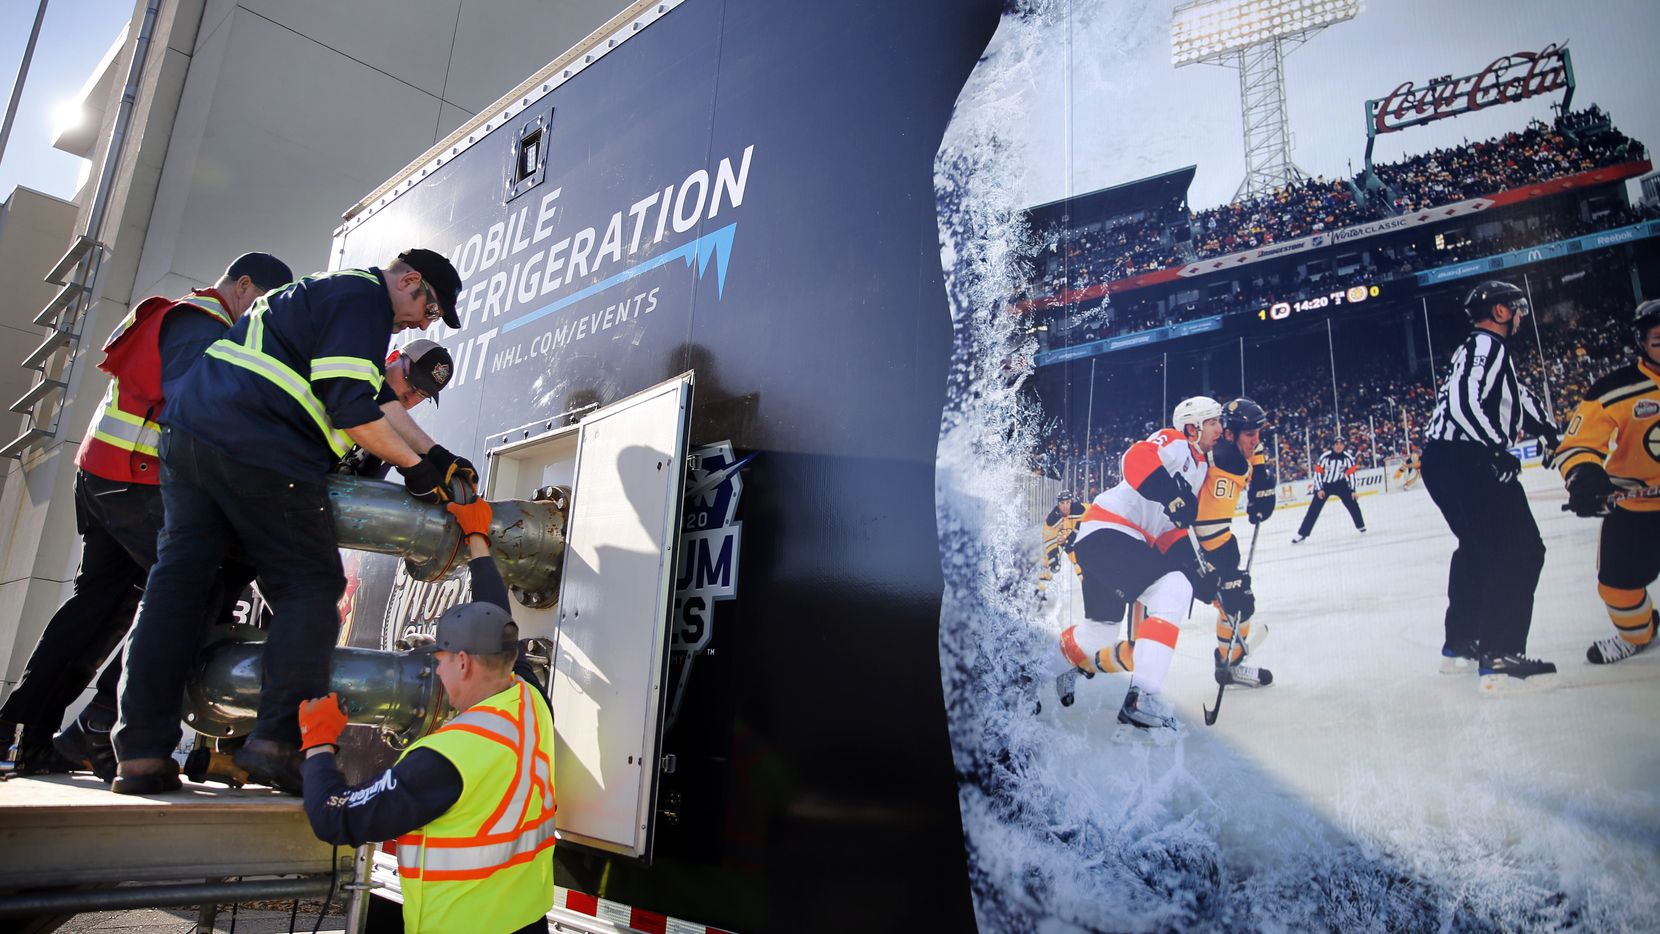 Workers assemble parts of the Mobile Refrigeration Unit which will freeze and keep the ice frozen for the New Year's Day Winter Classic hockey game at Fair Park in Dallas, Tuesday, December 17, 2019. According to the NHL, the 53-foot trailer is the world's largest mobile refrigeration unit. It houses a state-of-the-art ice-making and ice-monitoring equipment used to create an NHL-caliber sheet of ice. The annual game will pit the Dallas Stars against the Nashville Predators at the Cotton Bowl. (Tom Fox/The Dallas Morning News)